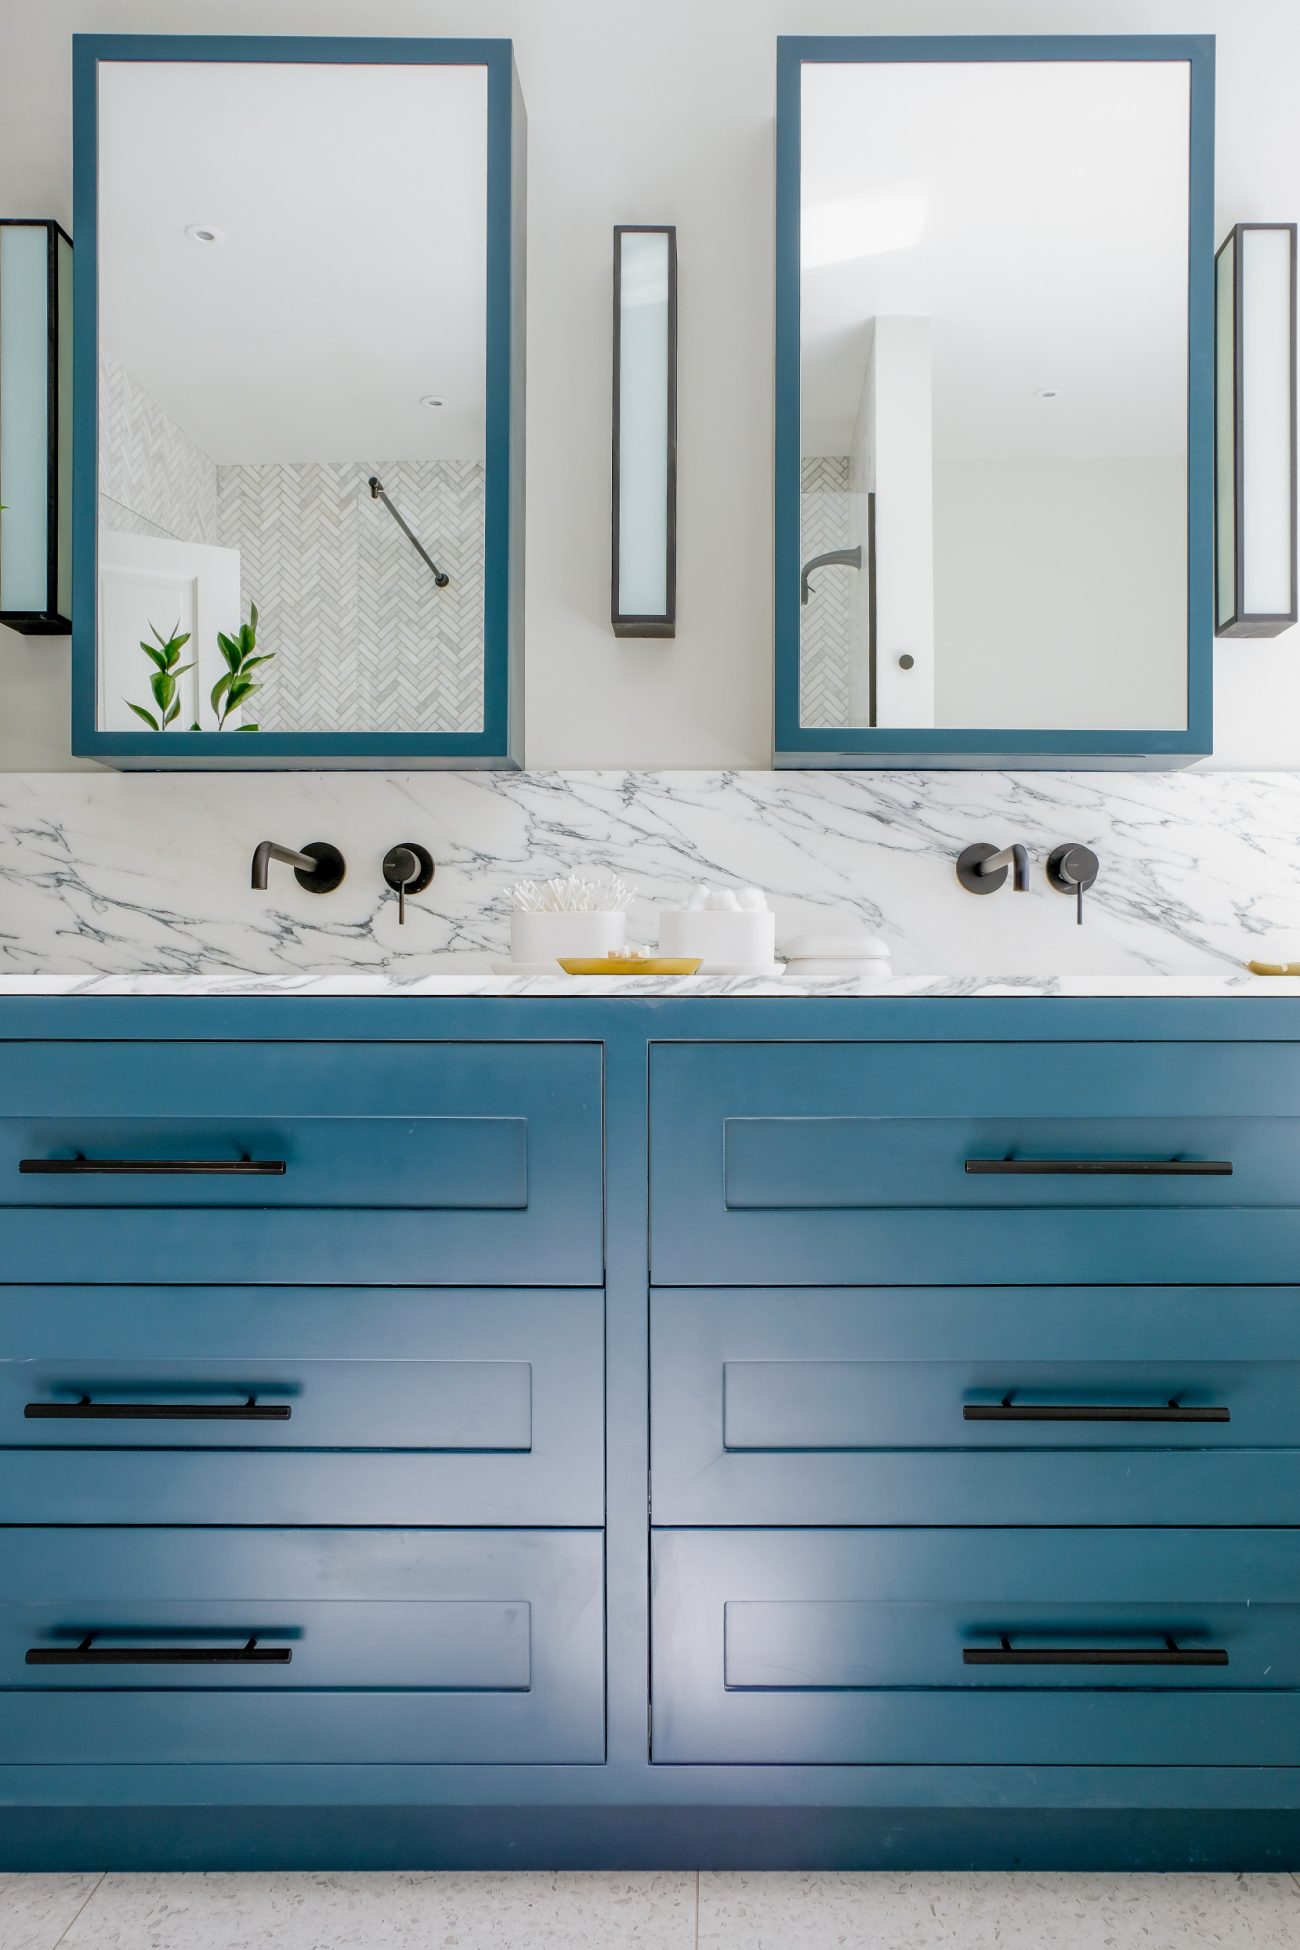 Extended marble countertop and backsplash with blue vanity